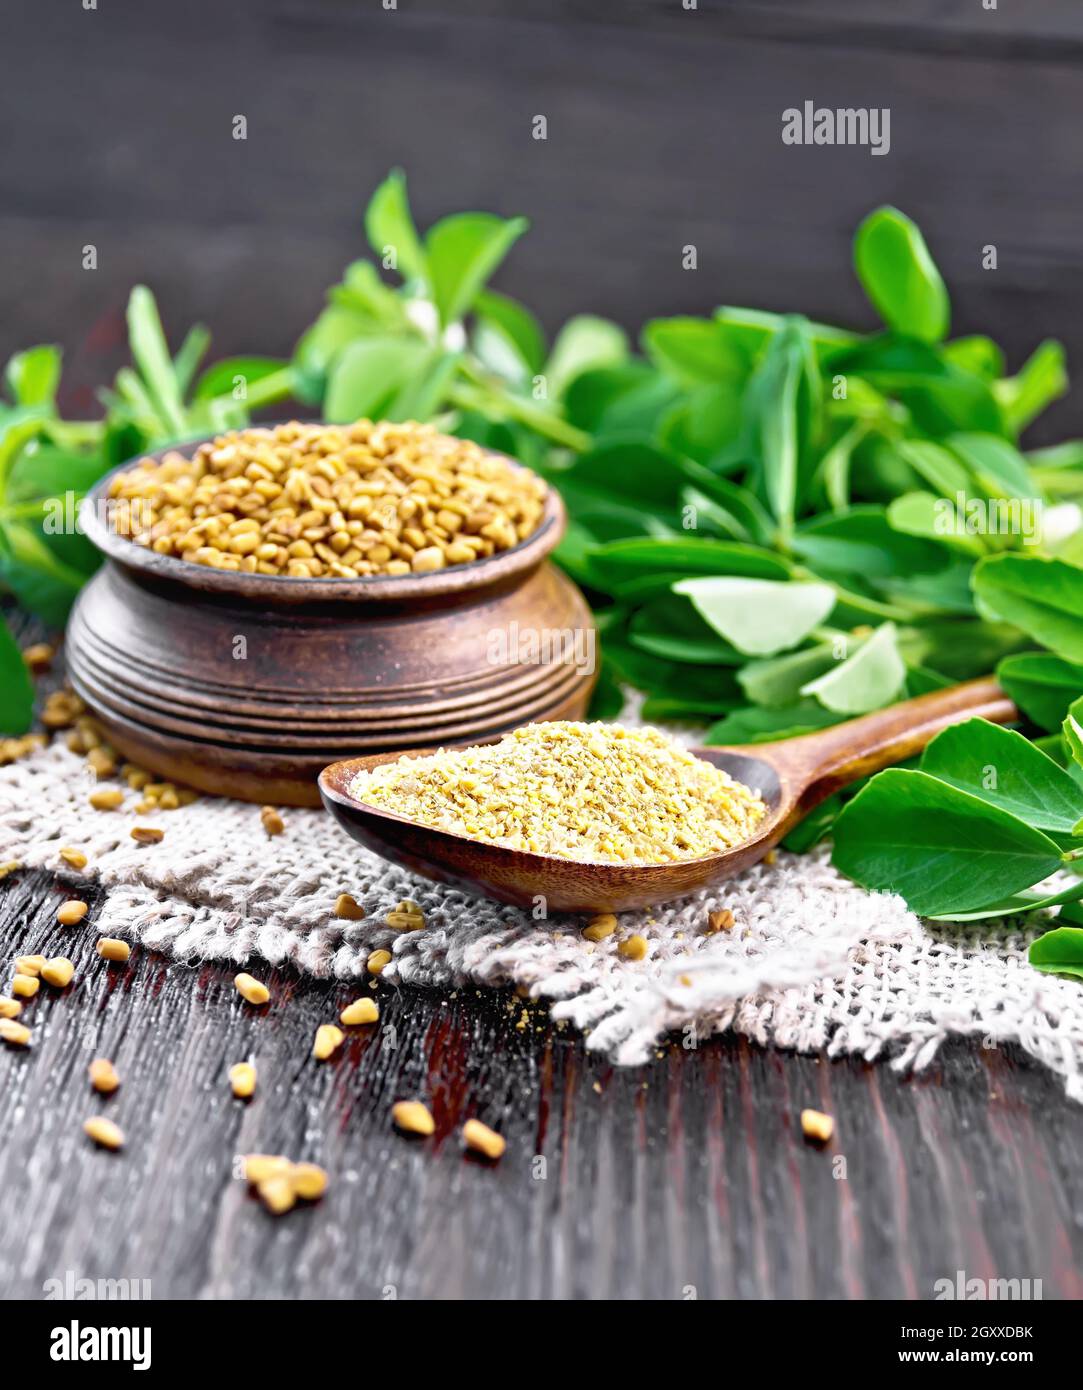 Ground fenugreek in a spoon and seeds in a bowl on burlap napkin with leaves on dark wooden board background Stock Photo